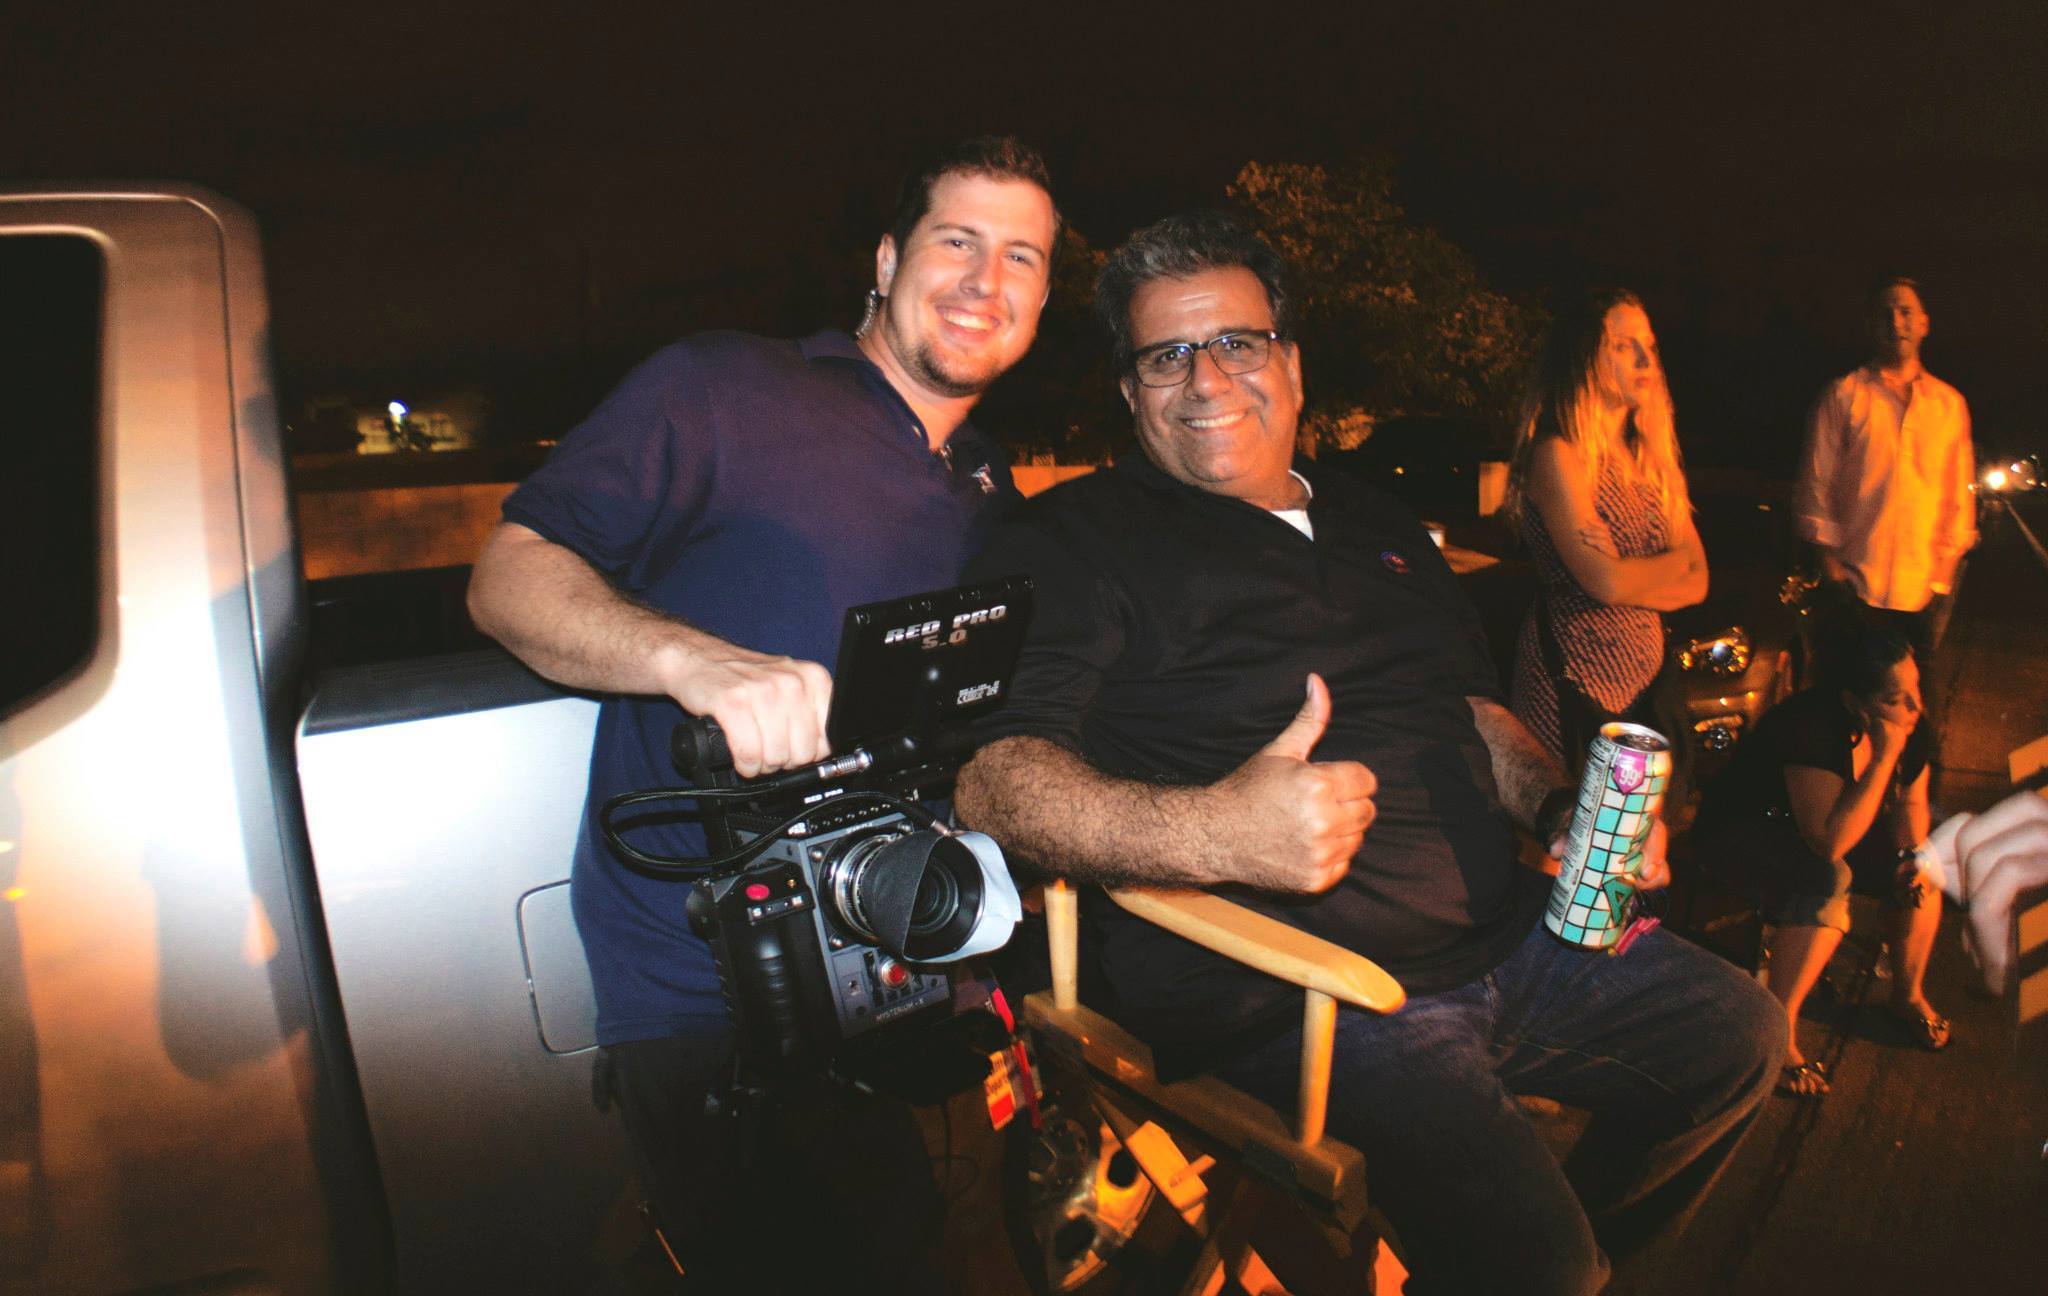 WITH A GREAT CAMERA MAN Mr. Oliver Buchanan !